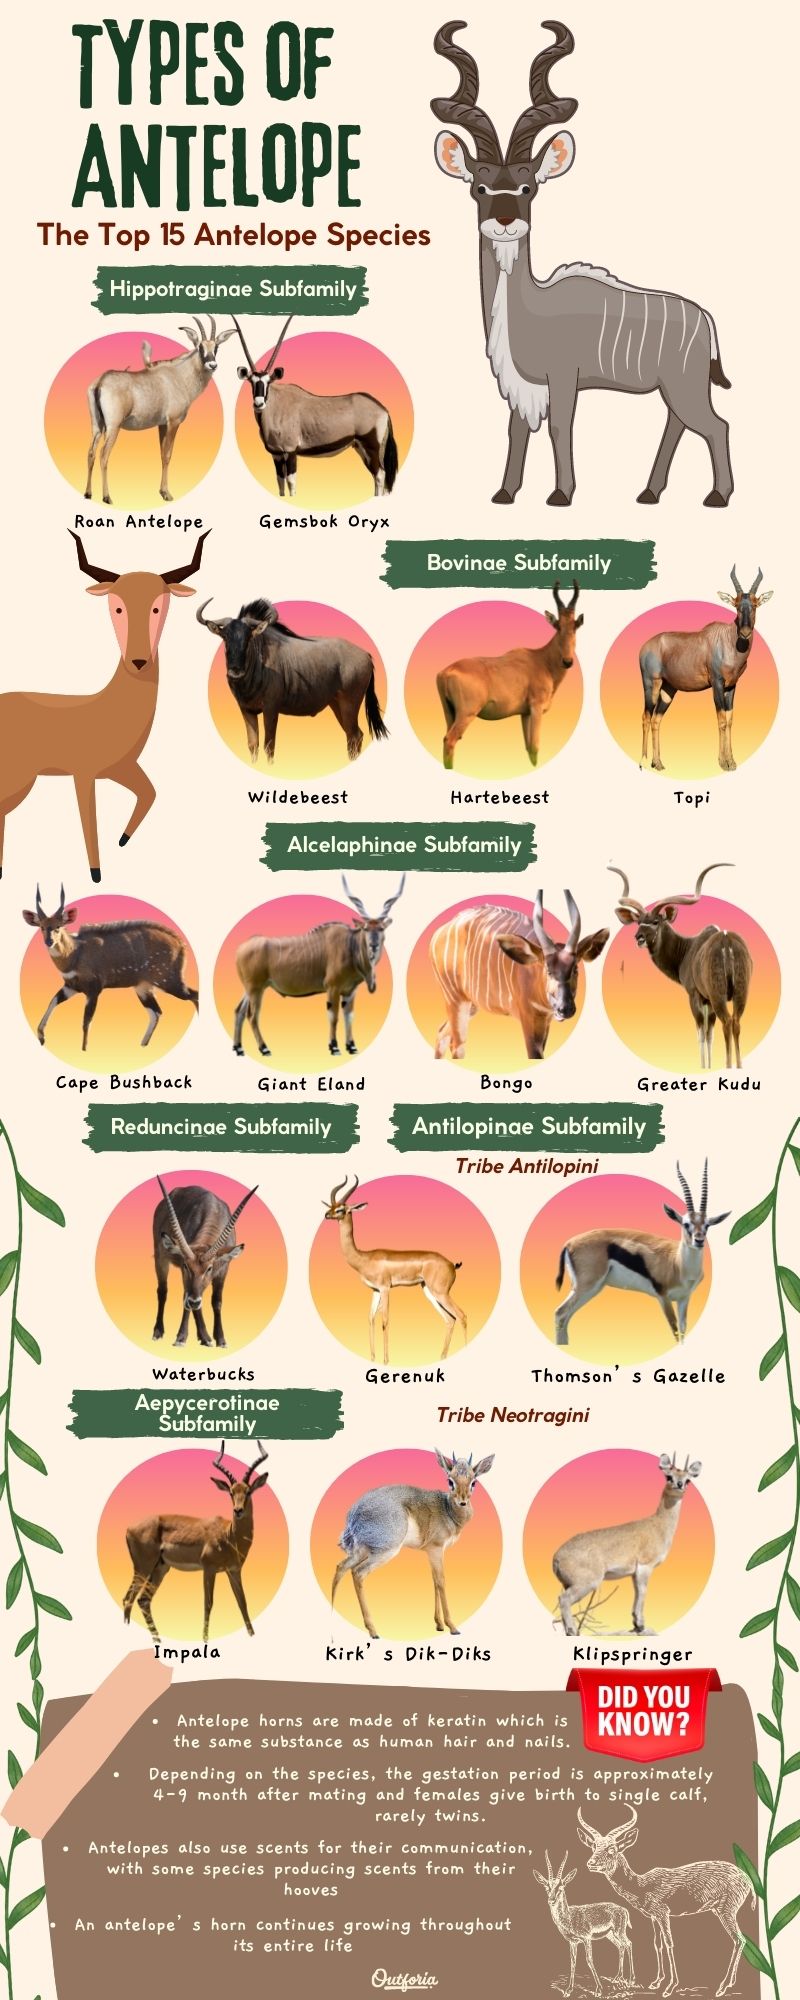 types of antelope chart with names, images, and fun facts